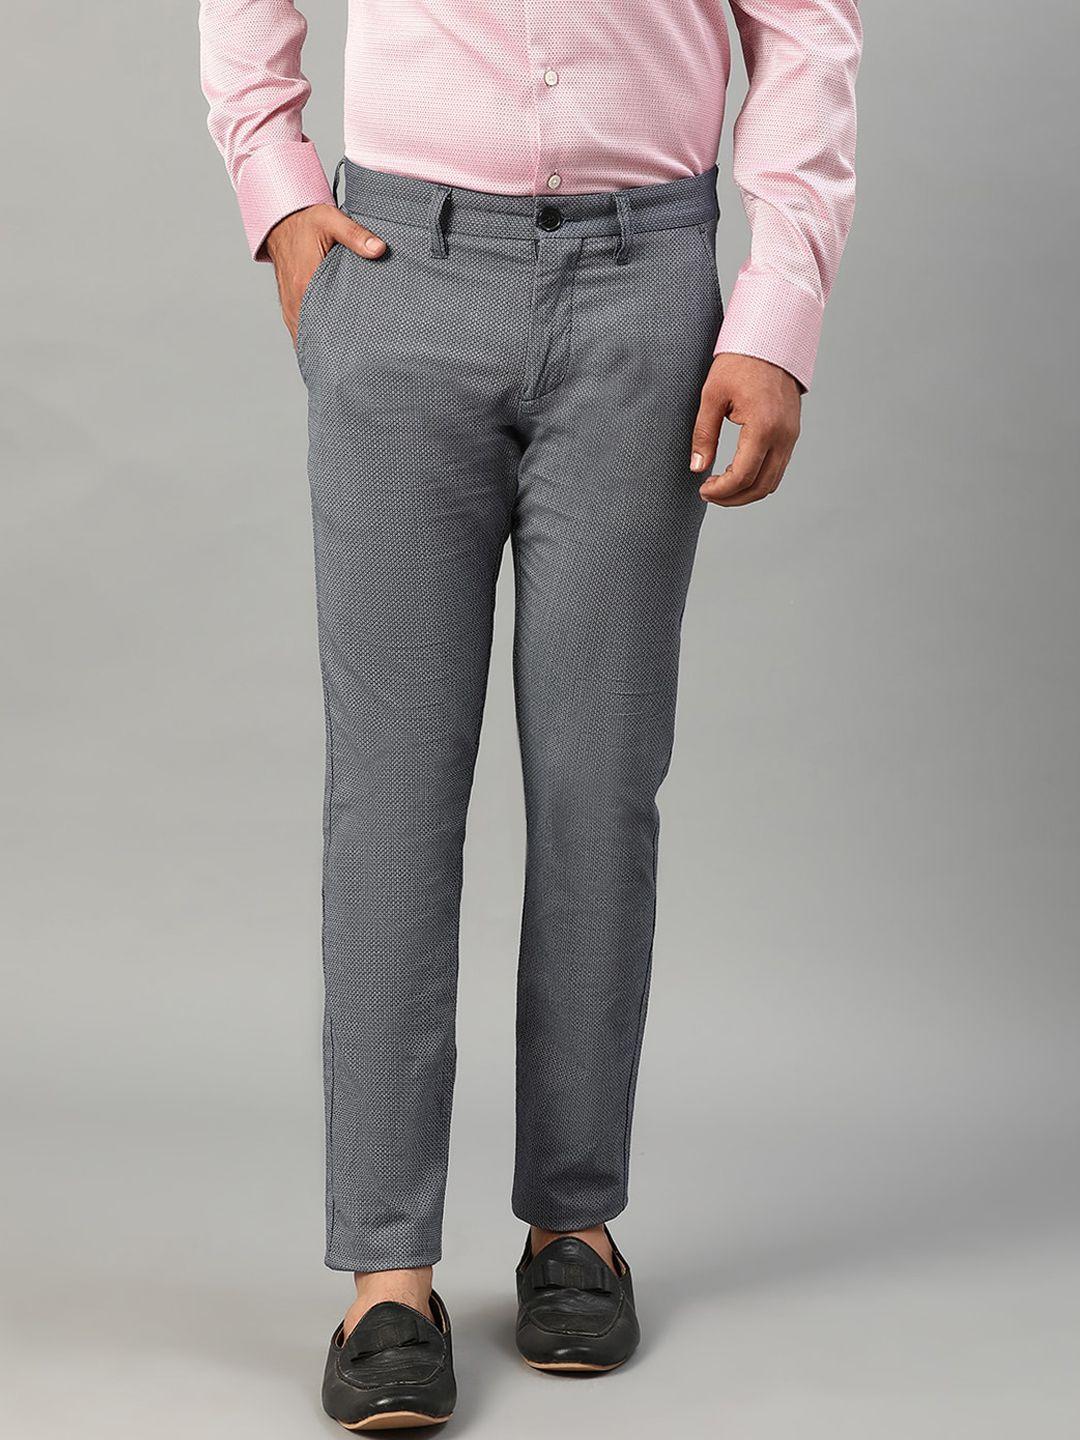 matinique men grey textured slim fit trousers